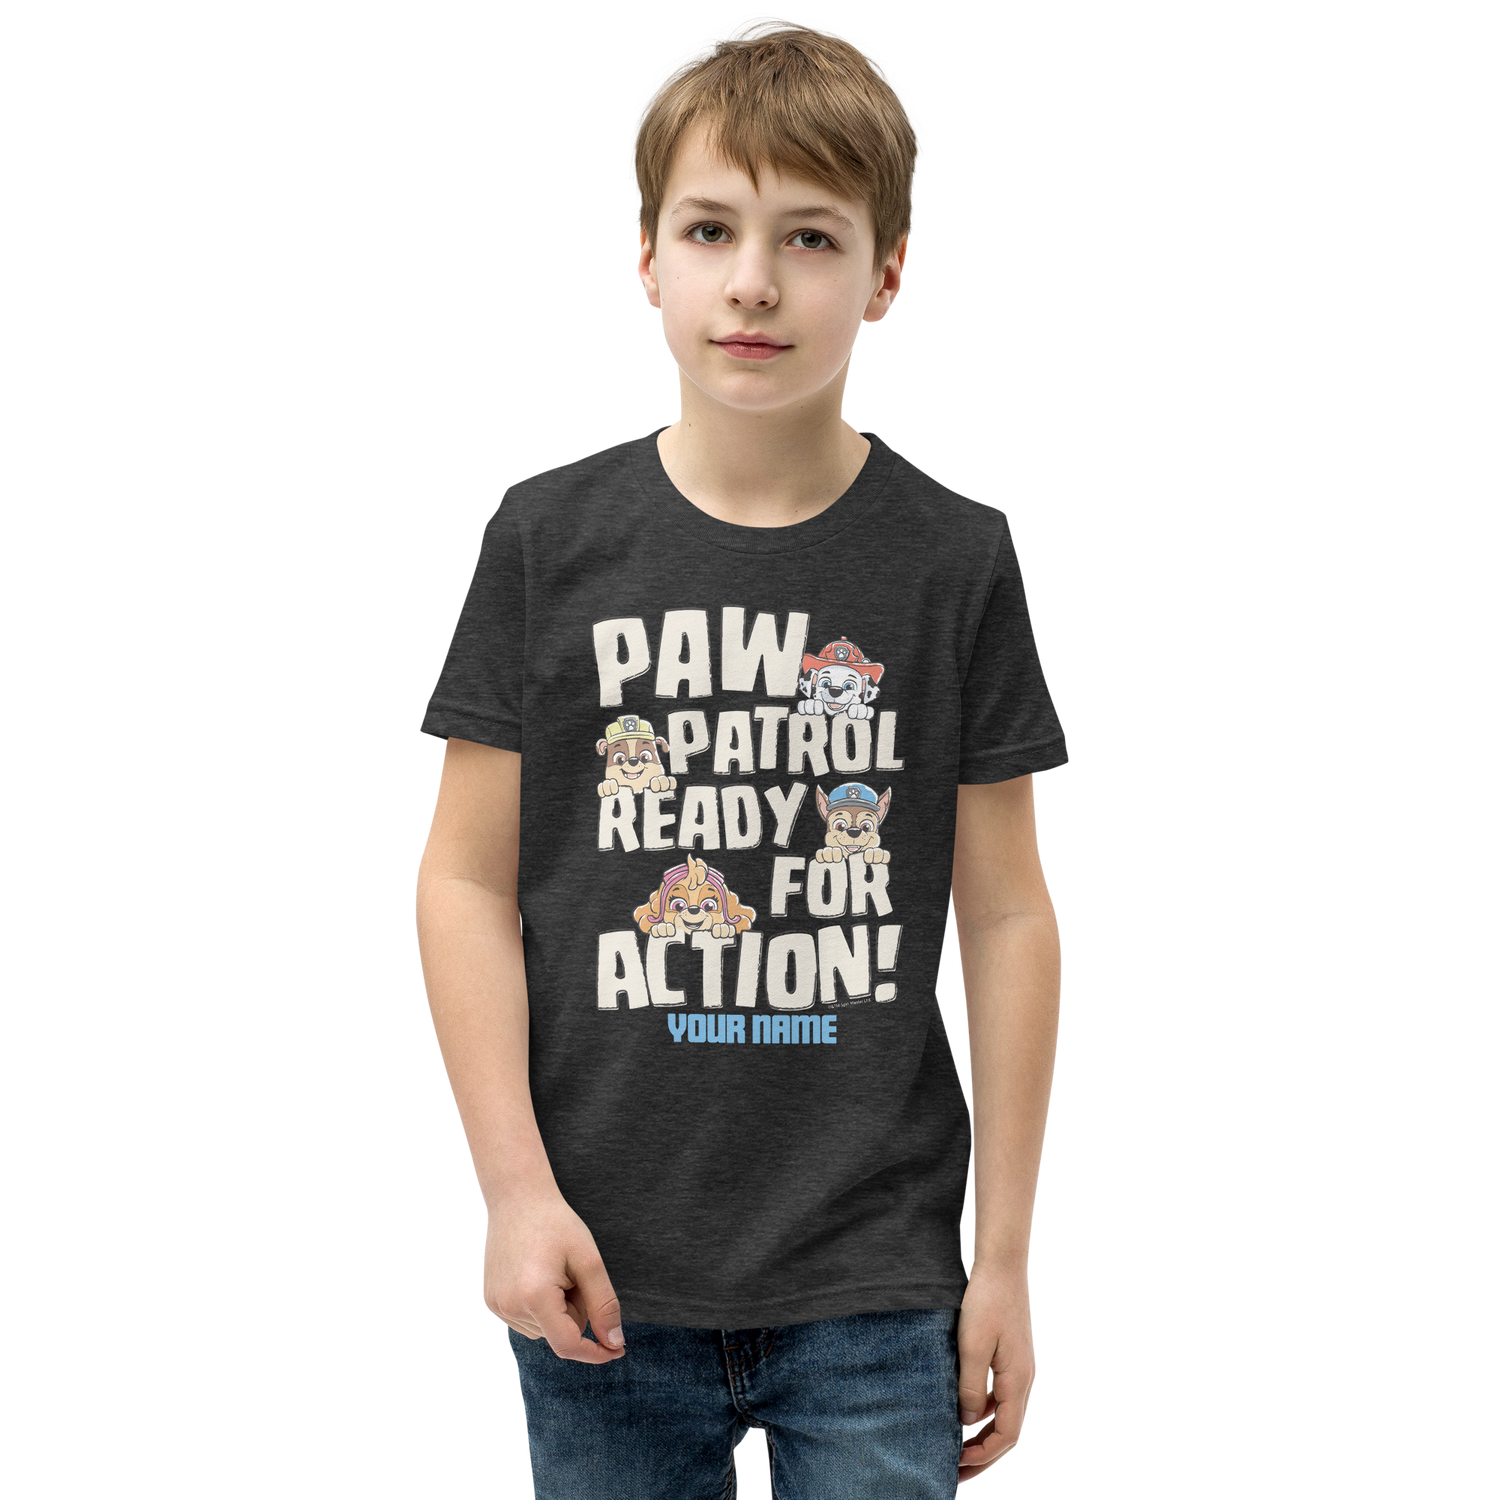 PAW Patrol Ready For Action Personalized Kids Premium T-Shirt